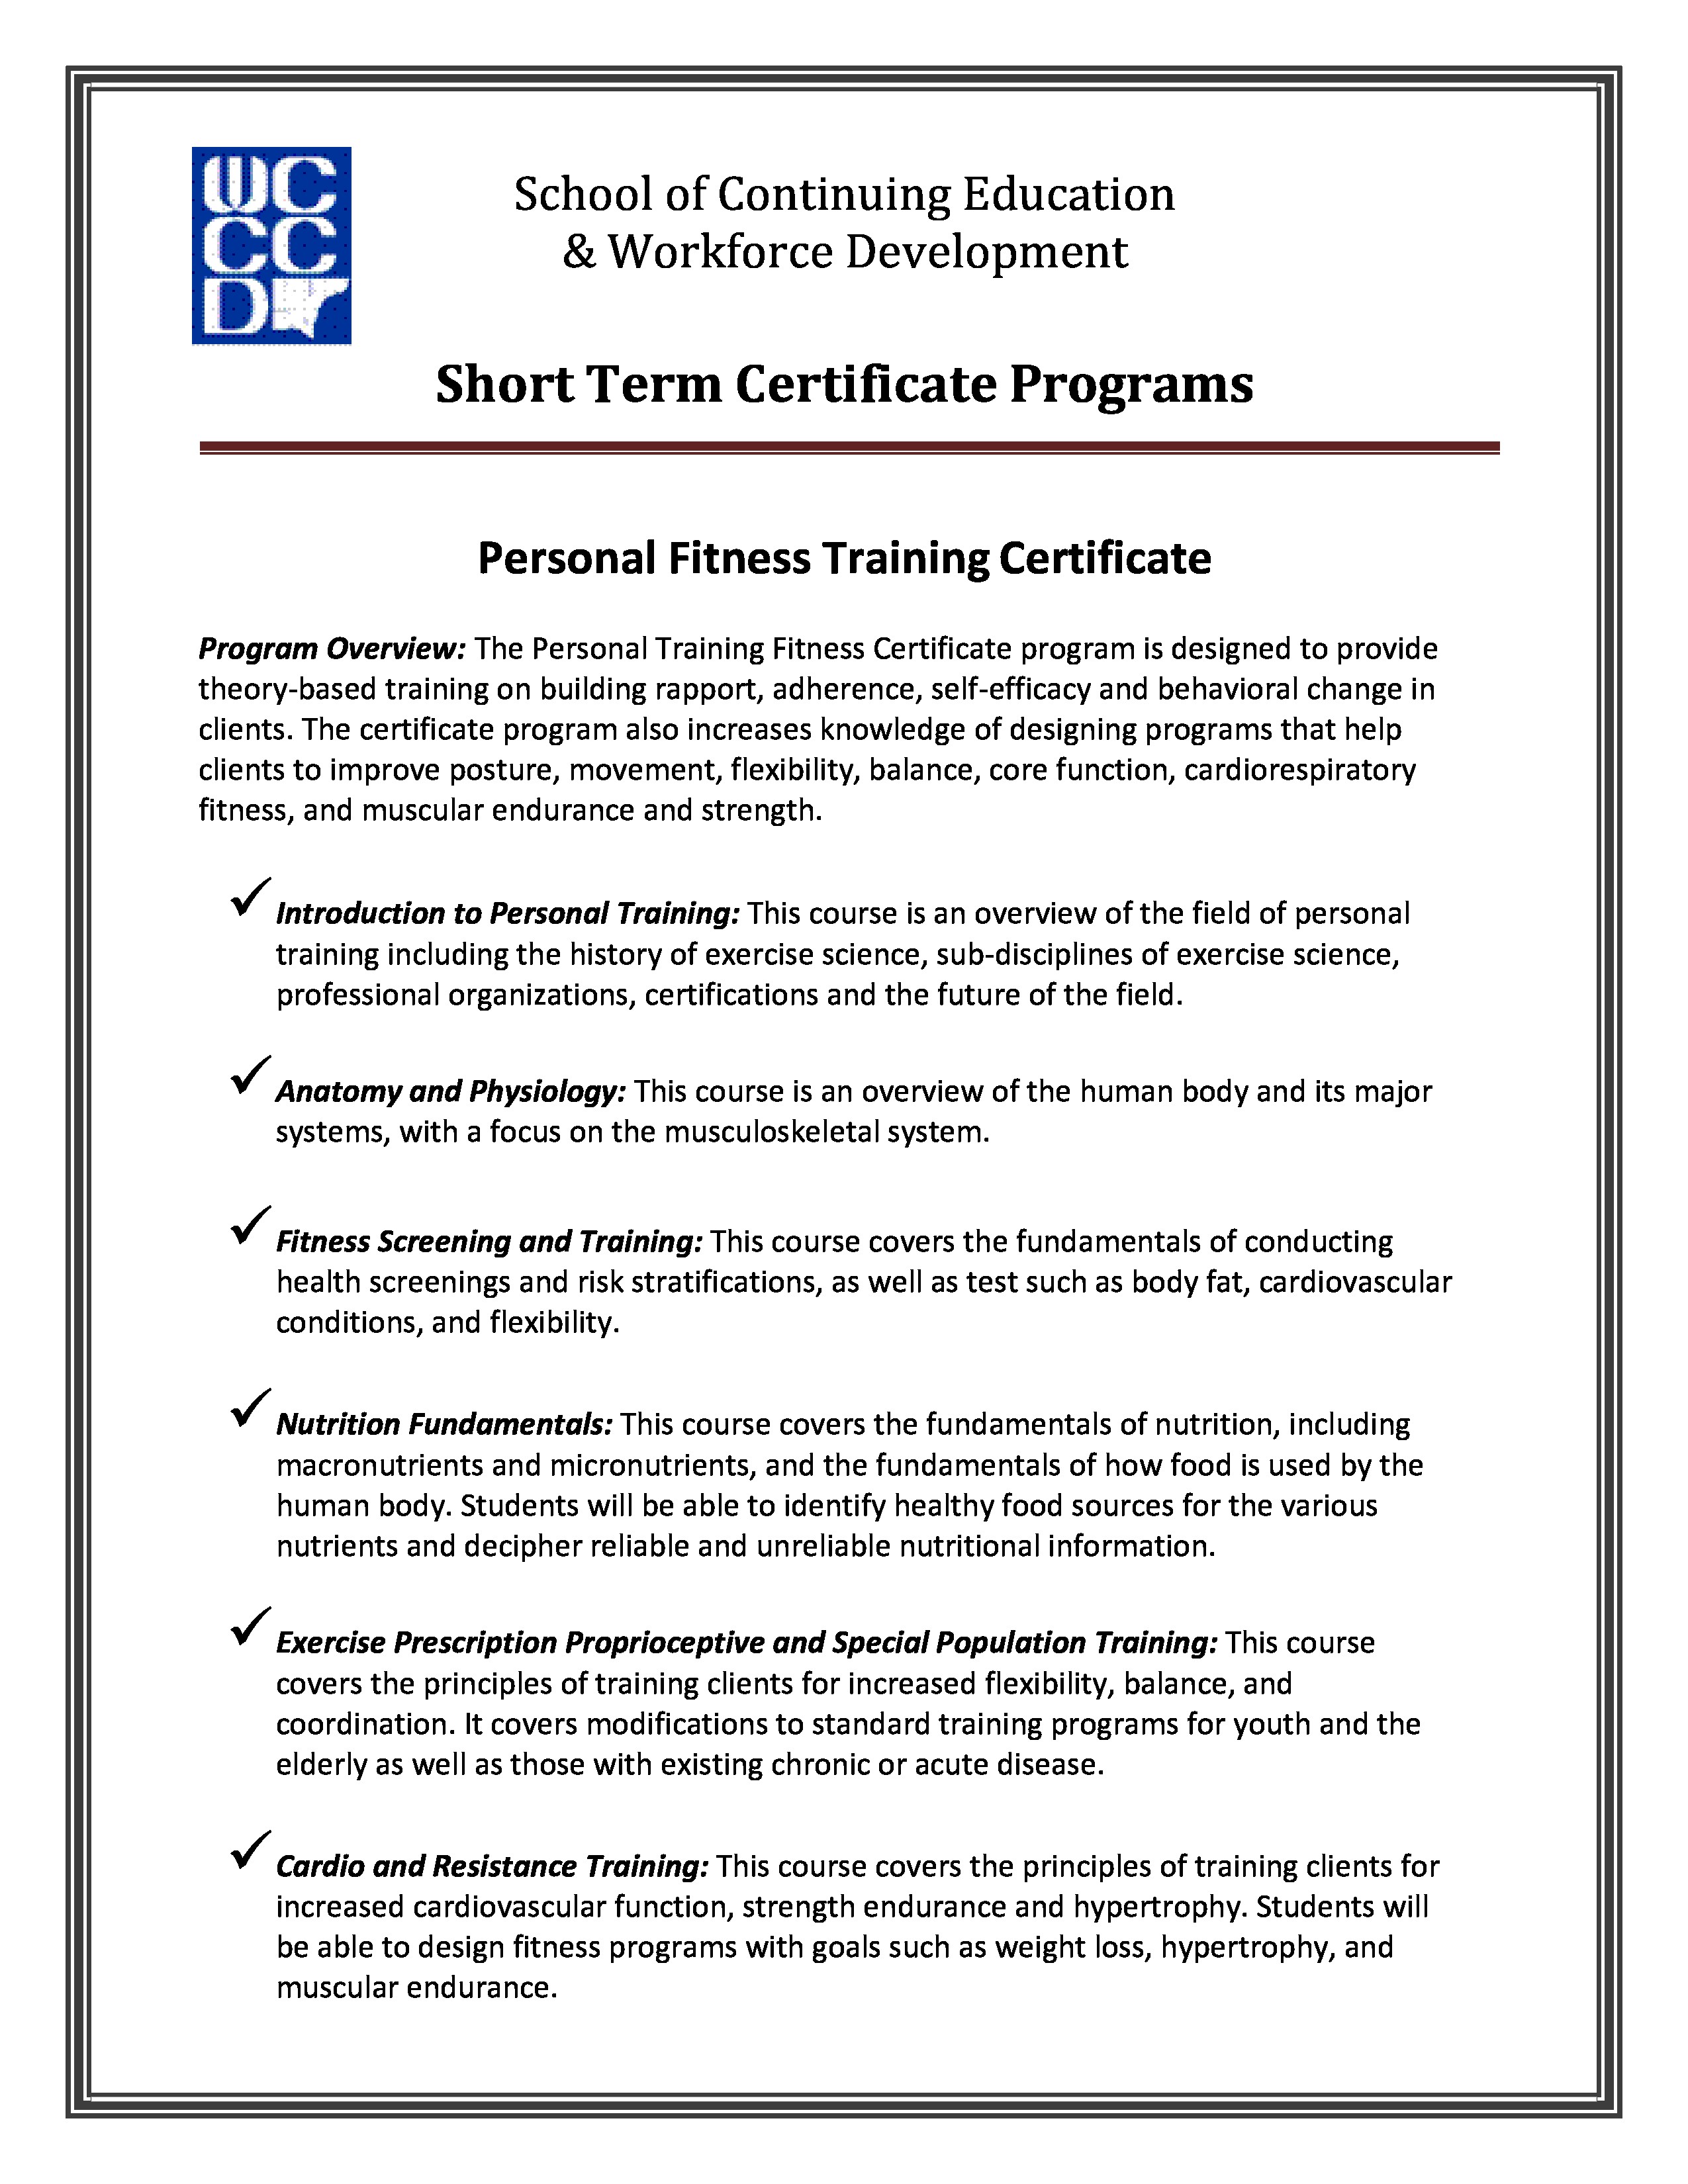 Free Personal Fitness Training Certificate Templates At Trainer Template